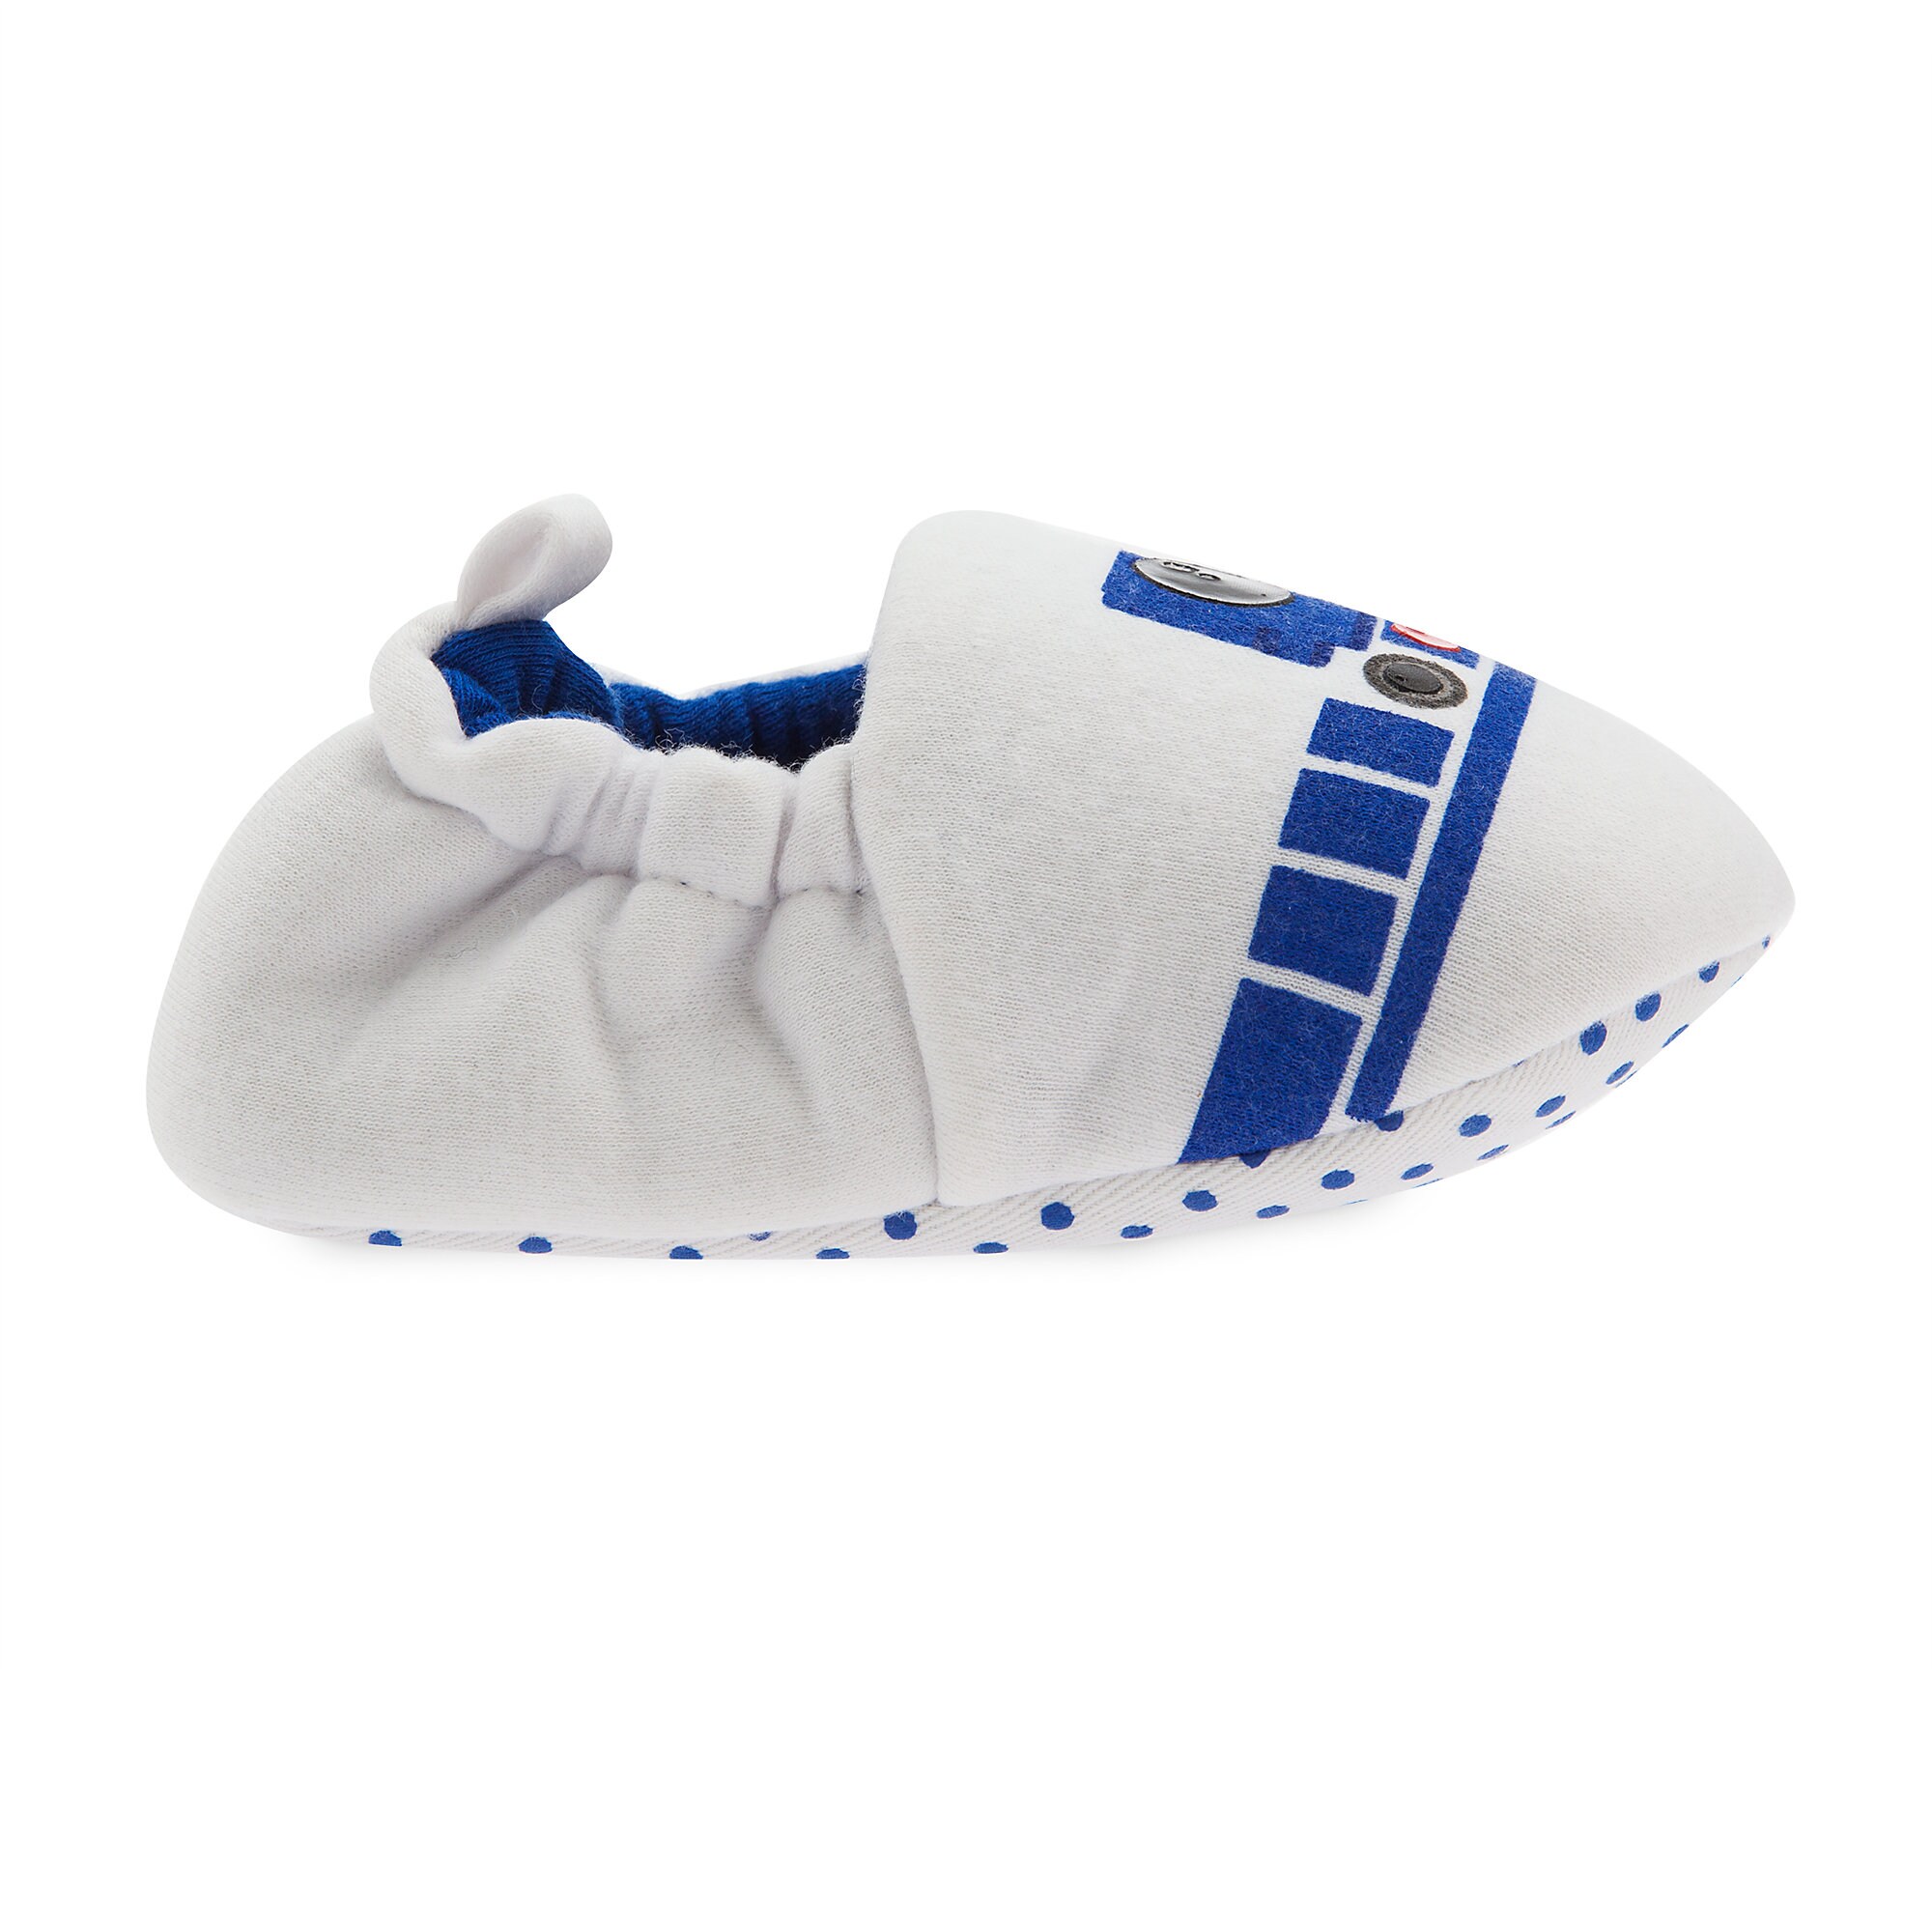 R2-D2 Costume Shoes for Baby